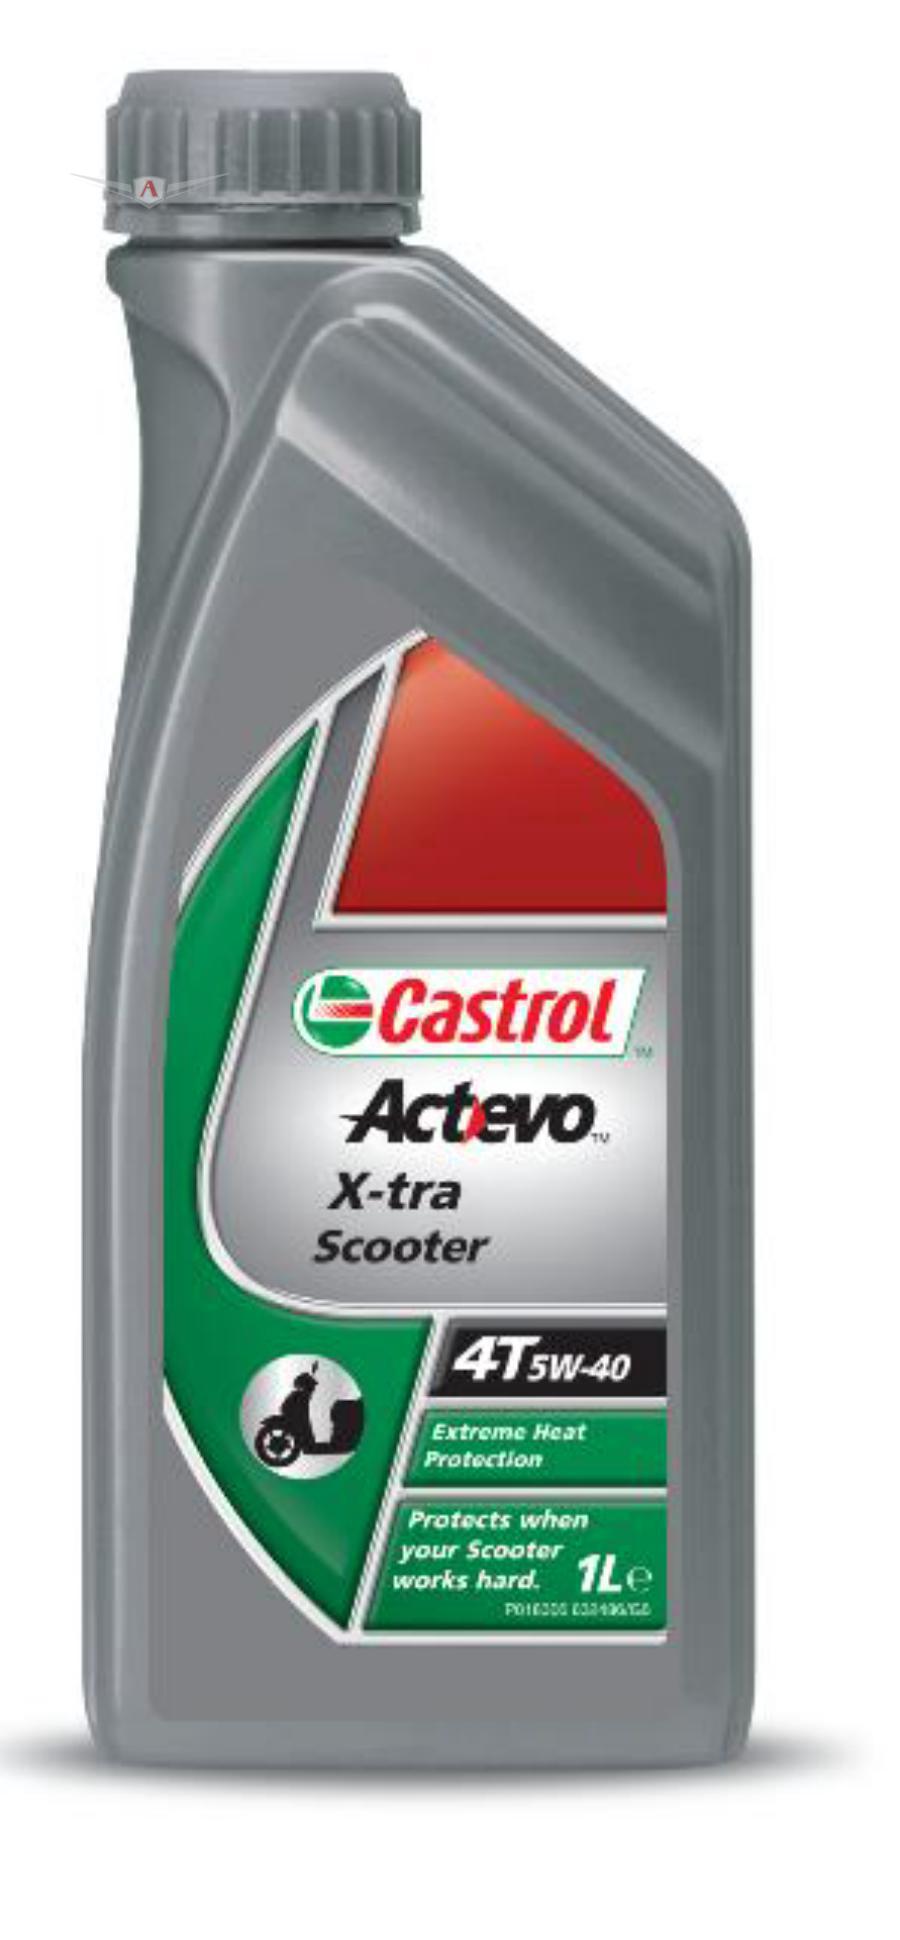 151A76 CASTROL Масло моторное синтетическое Act&gt,Evo X-tra Scooter 4T 5W-40, 1л